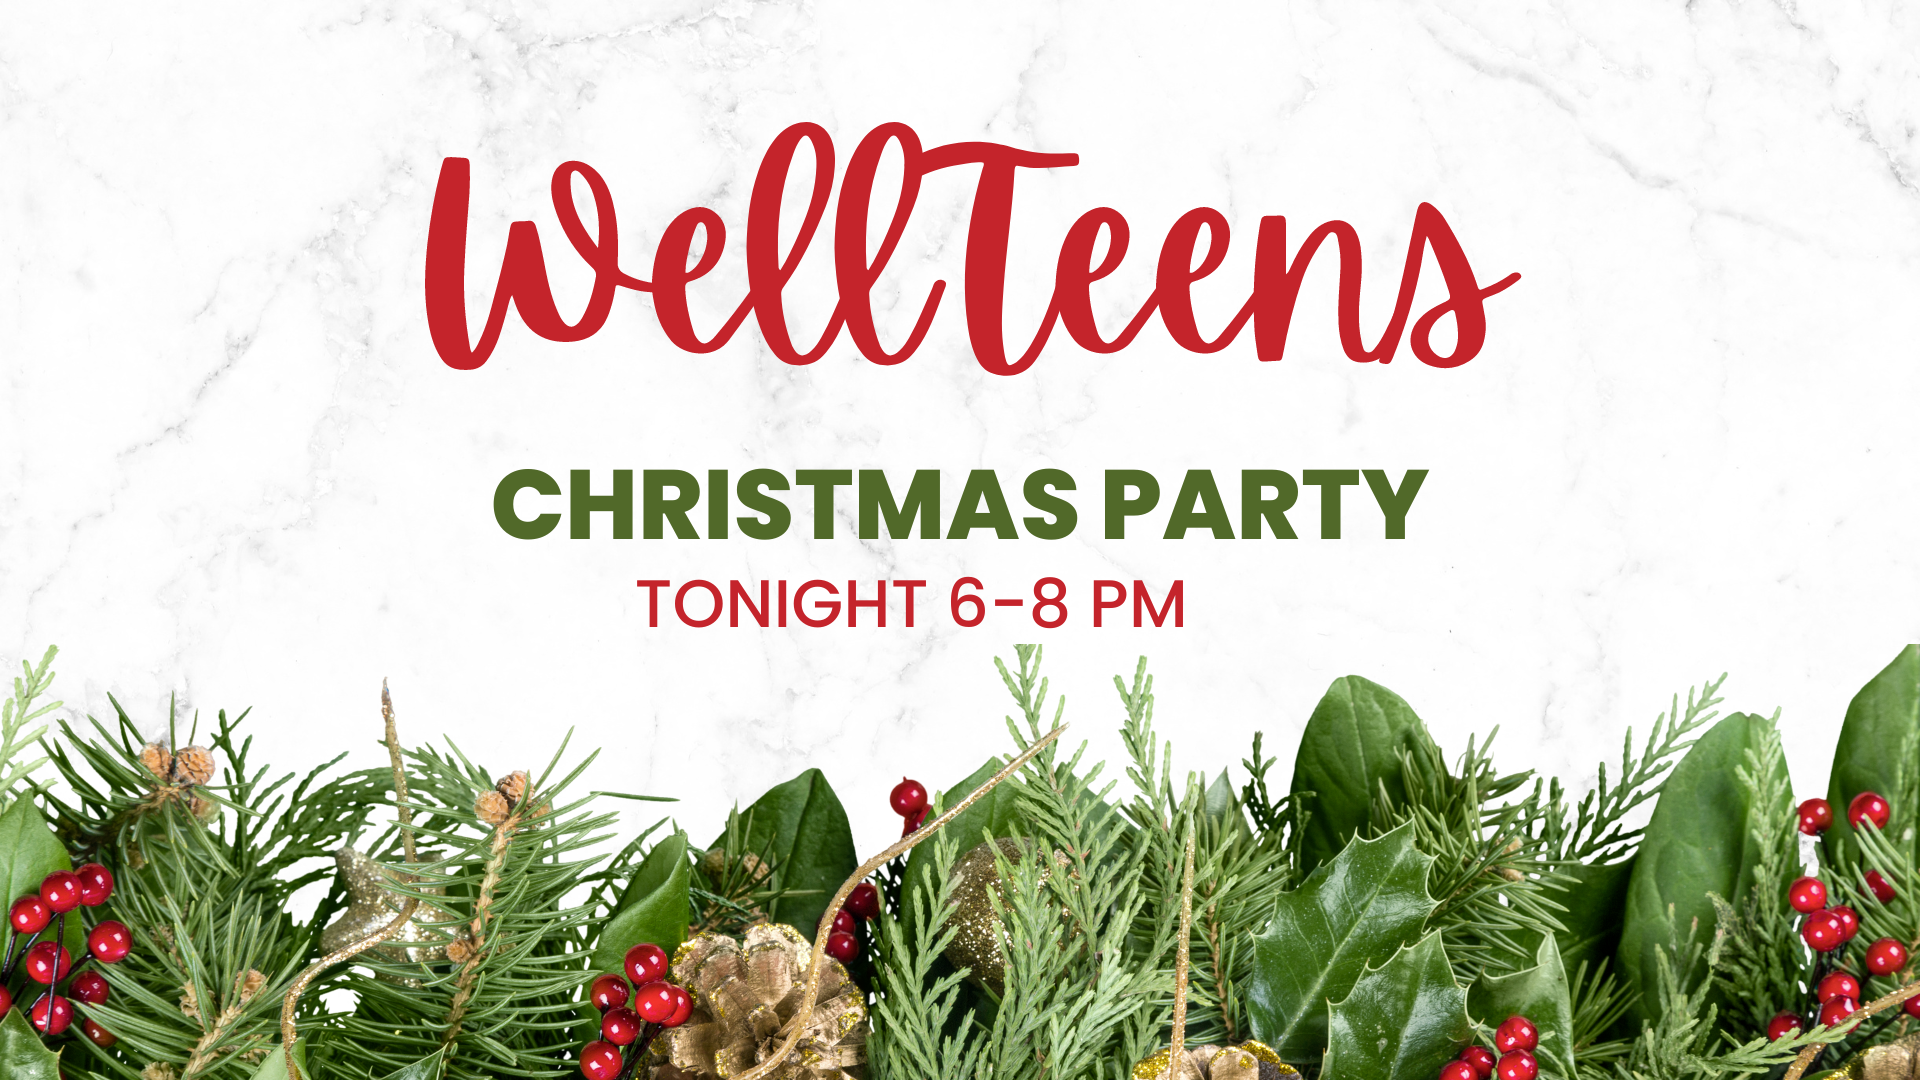 WellTeens Christmas Party image